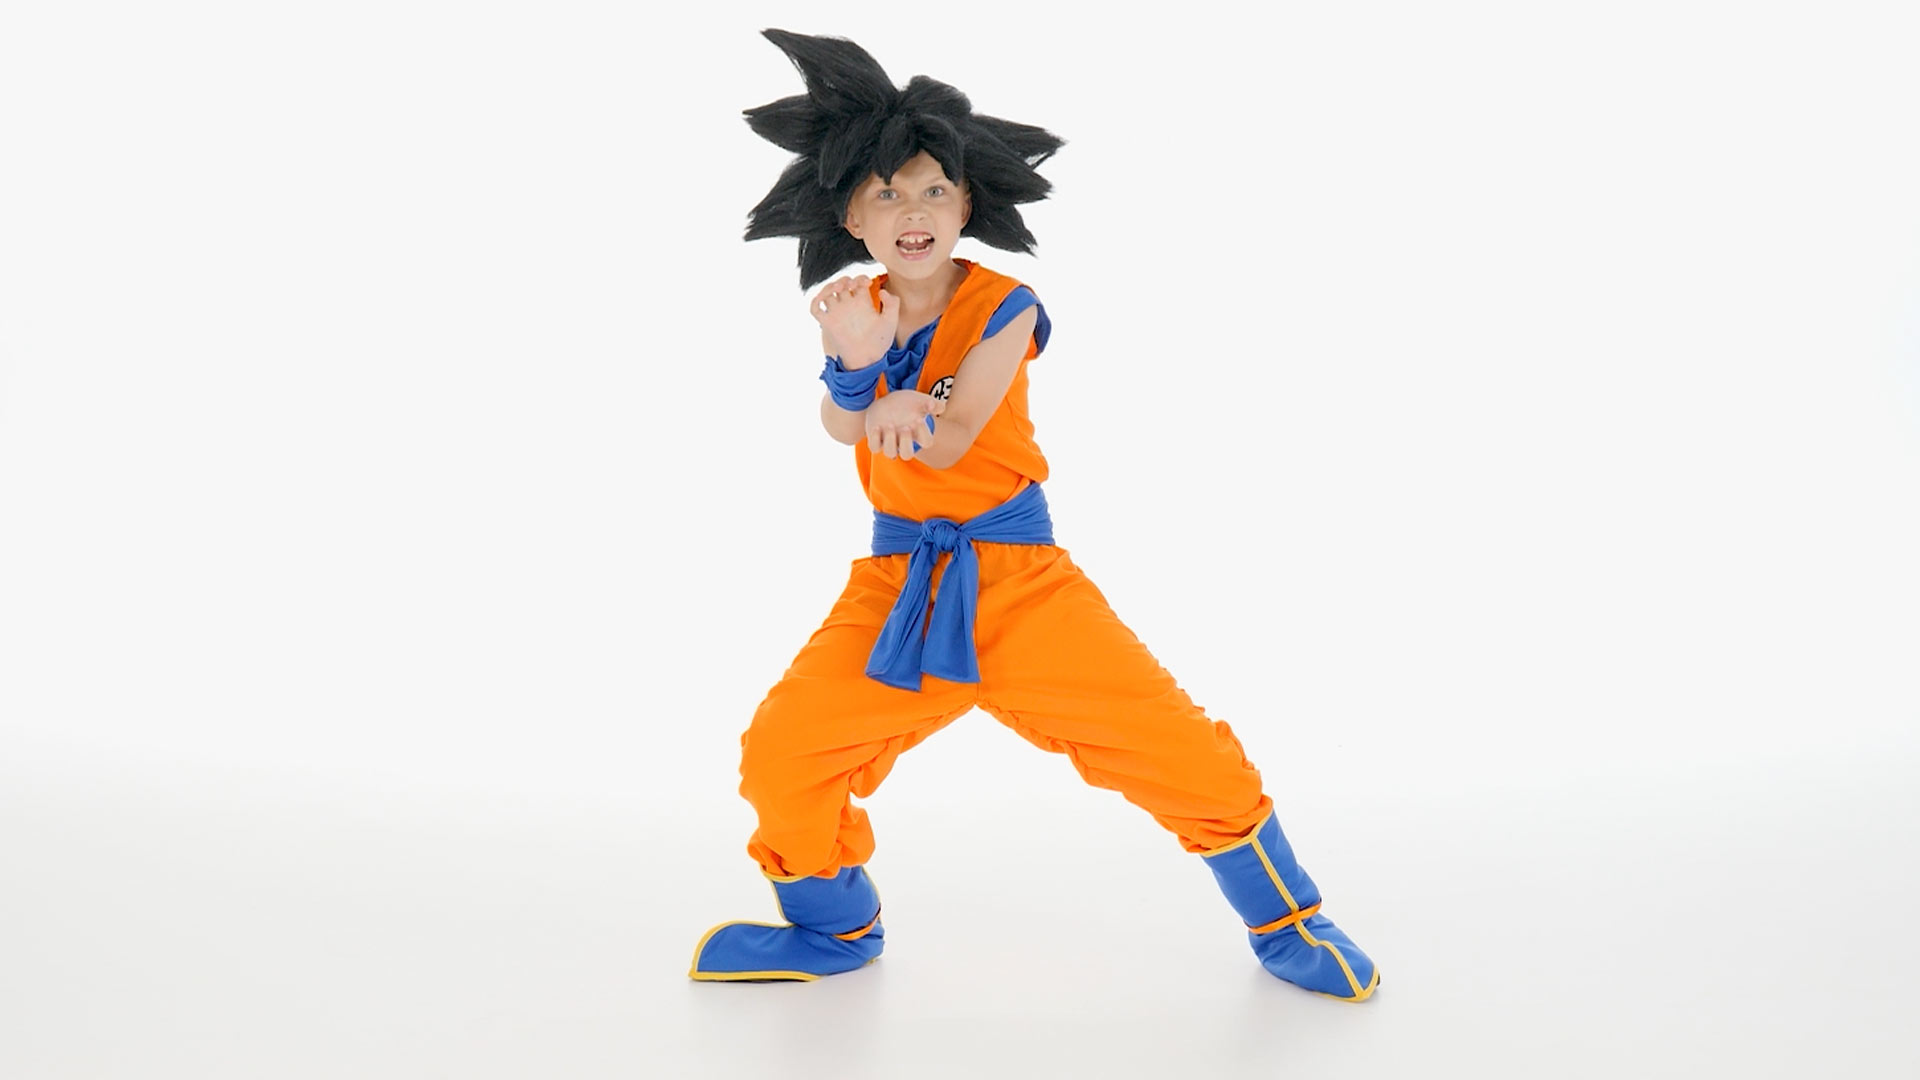 Sending your kid off to fight Frieza on Namek? Don't let him forget his Child Goku Costume. He's going to need it if he wants to bust out his Dragon Ball Z moves on him.